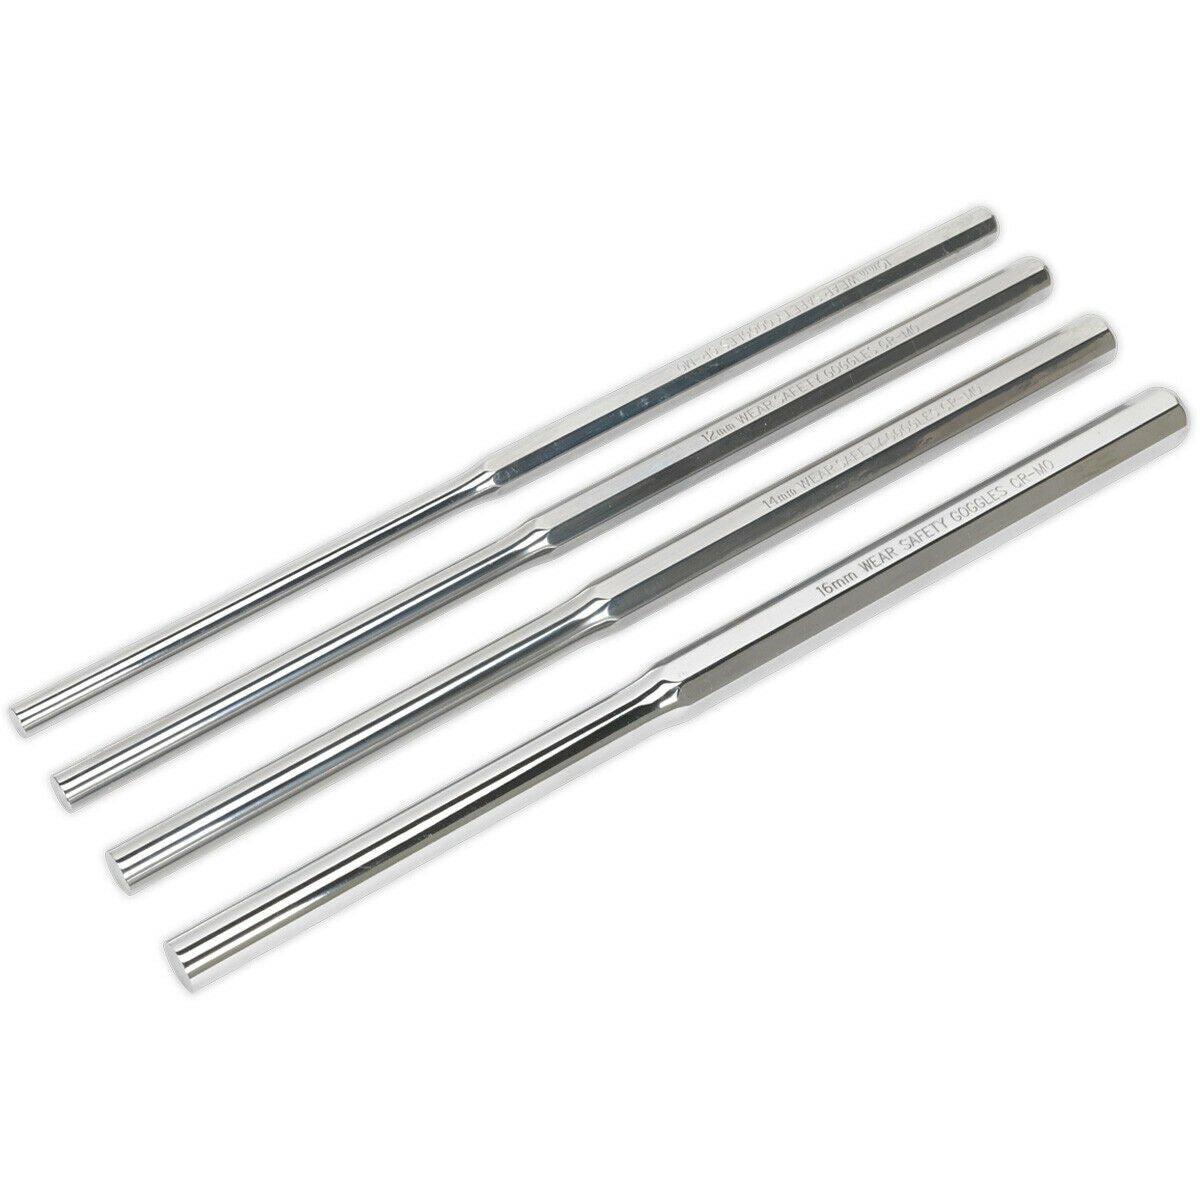 4 Piece 350mm Extra-Long Parallel Pin Punch Set - Hardened & Tempered - Chromoly